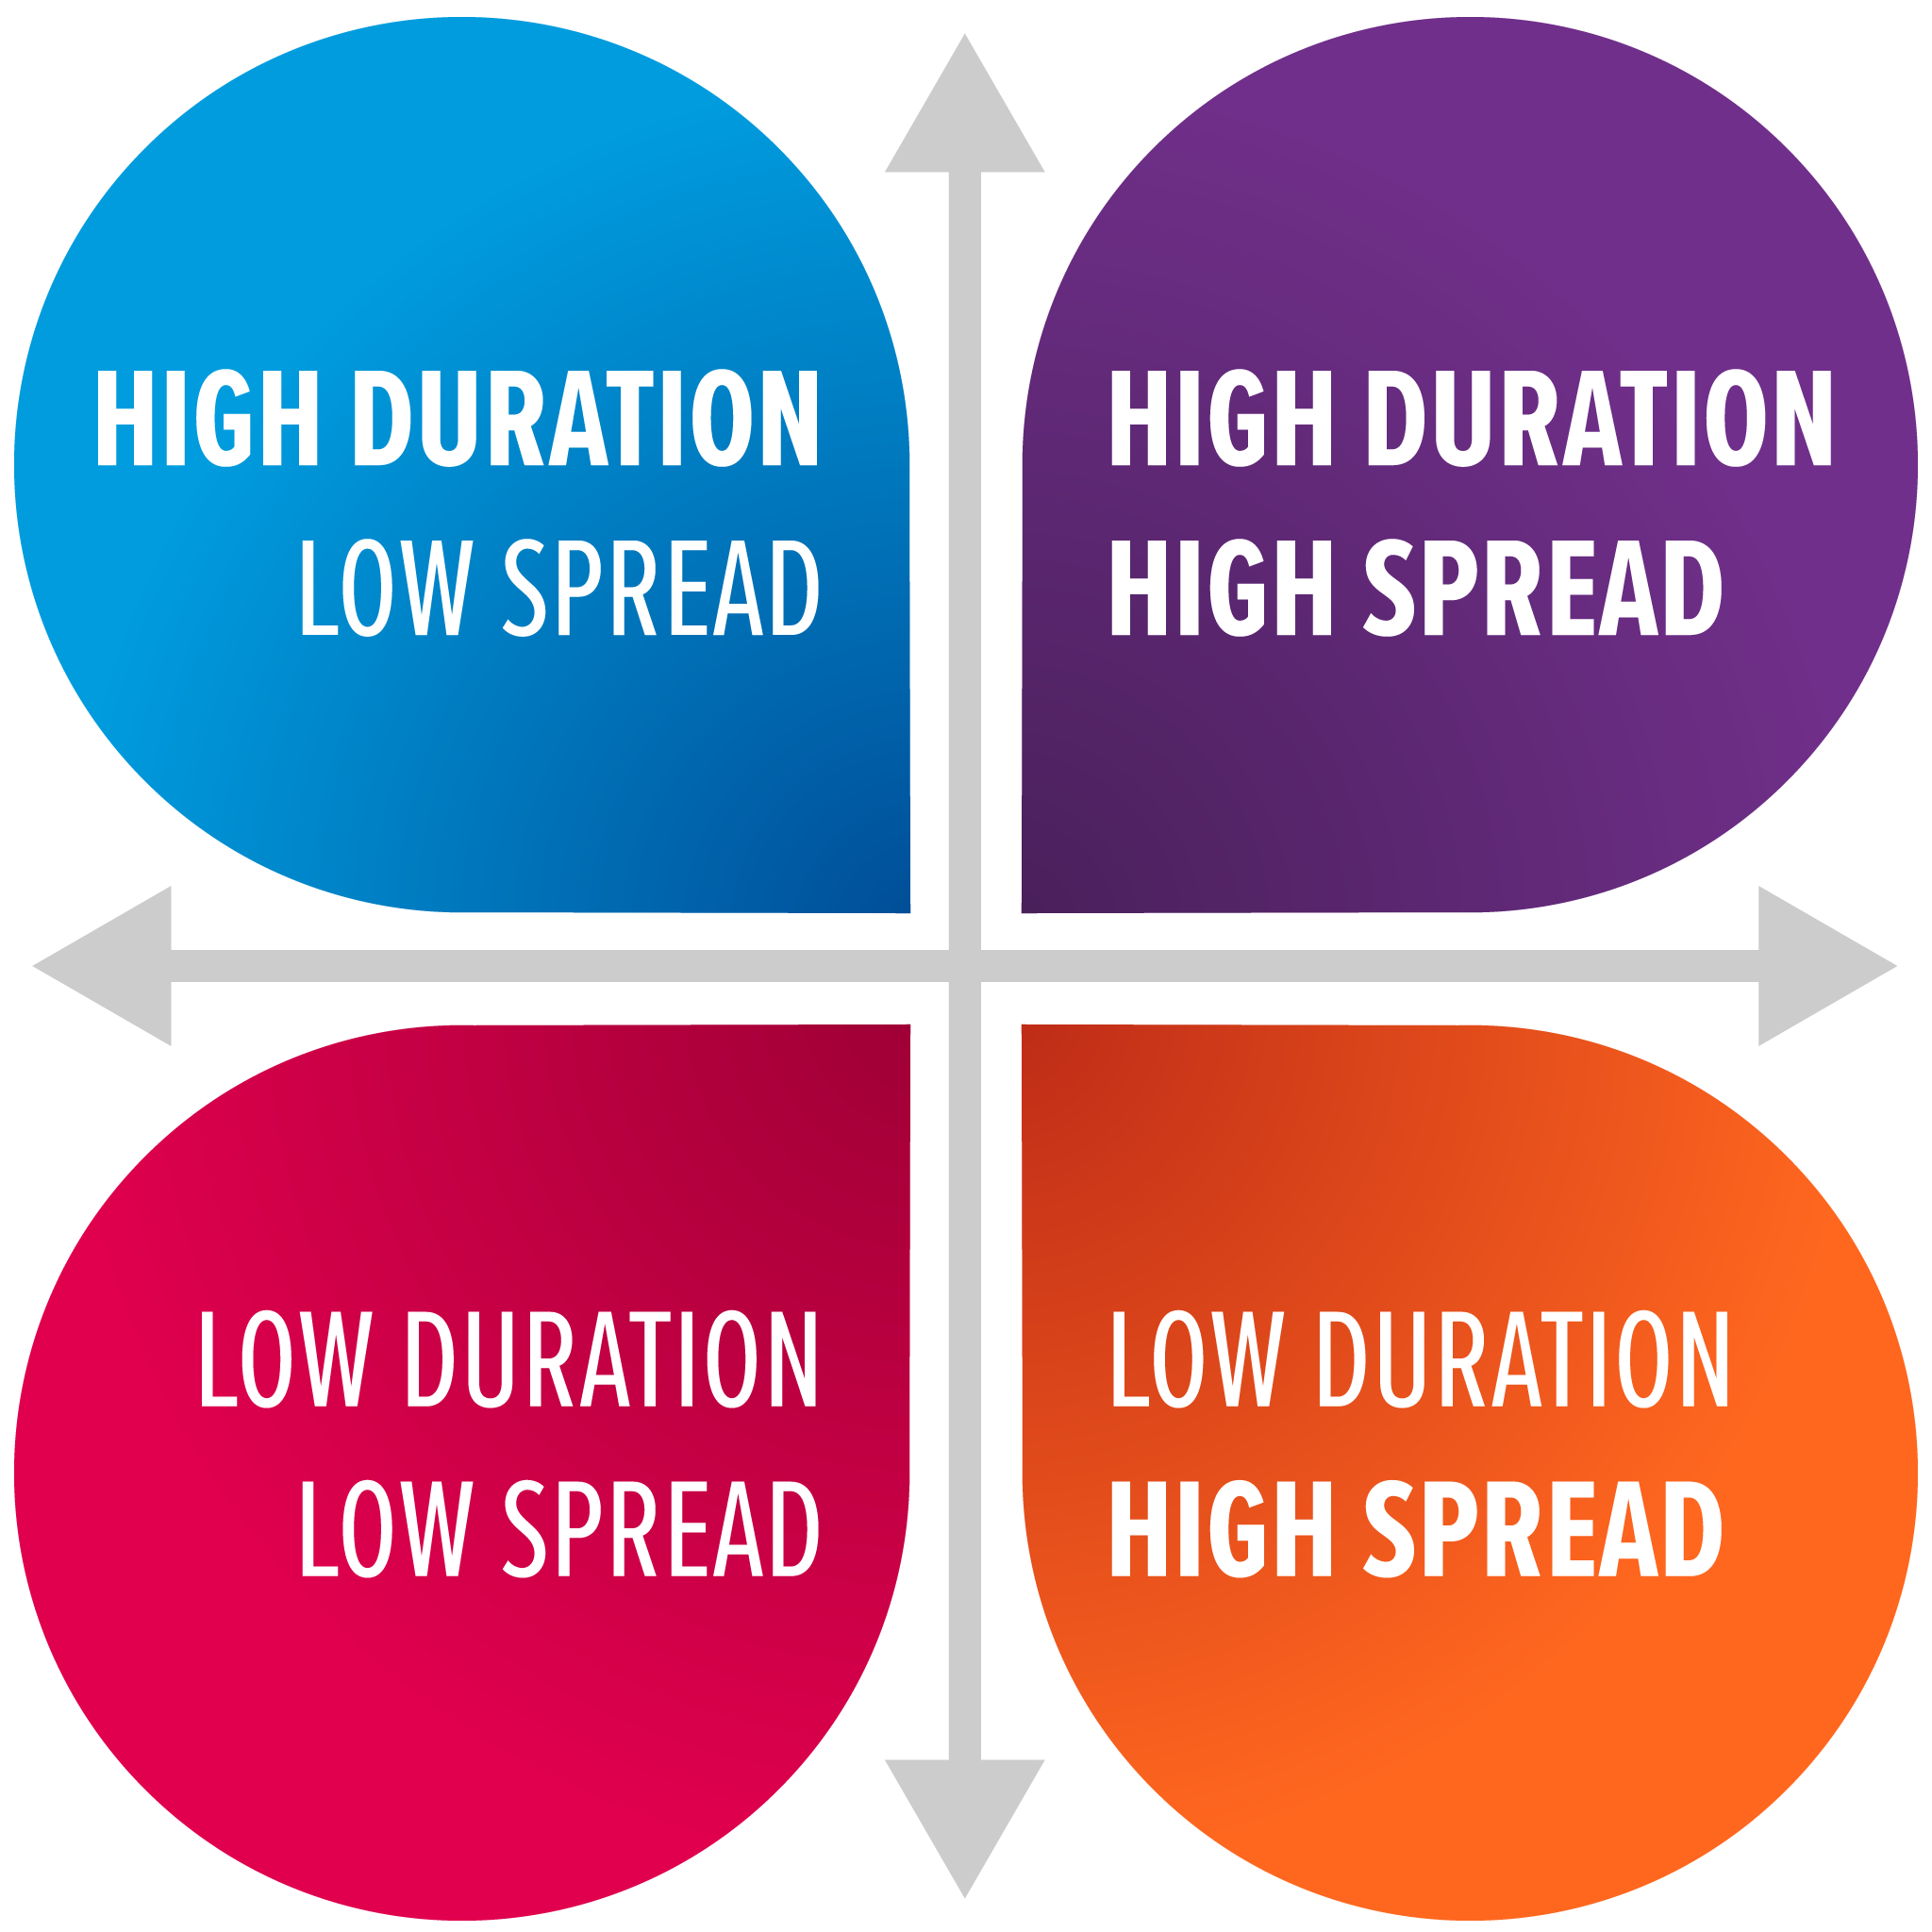 Futures Thinking Now: Communicating the Future. Two-by-two scenario matrix depicting high duration and high spread in the upper right; low duration and high spread in the lower right; low duration and low spread in the lower left; and high duration, low spread in the upper left.